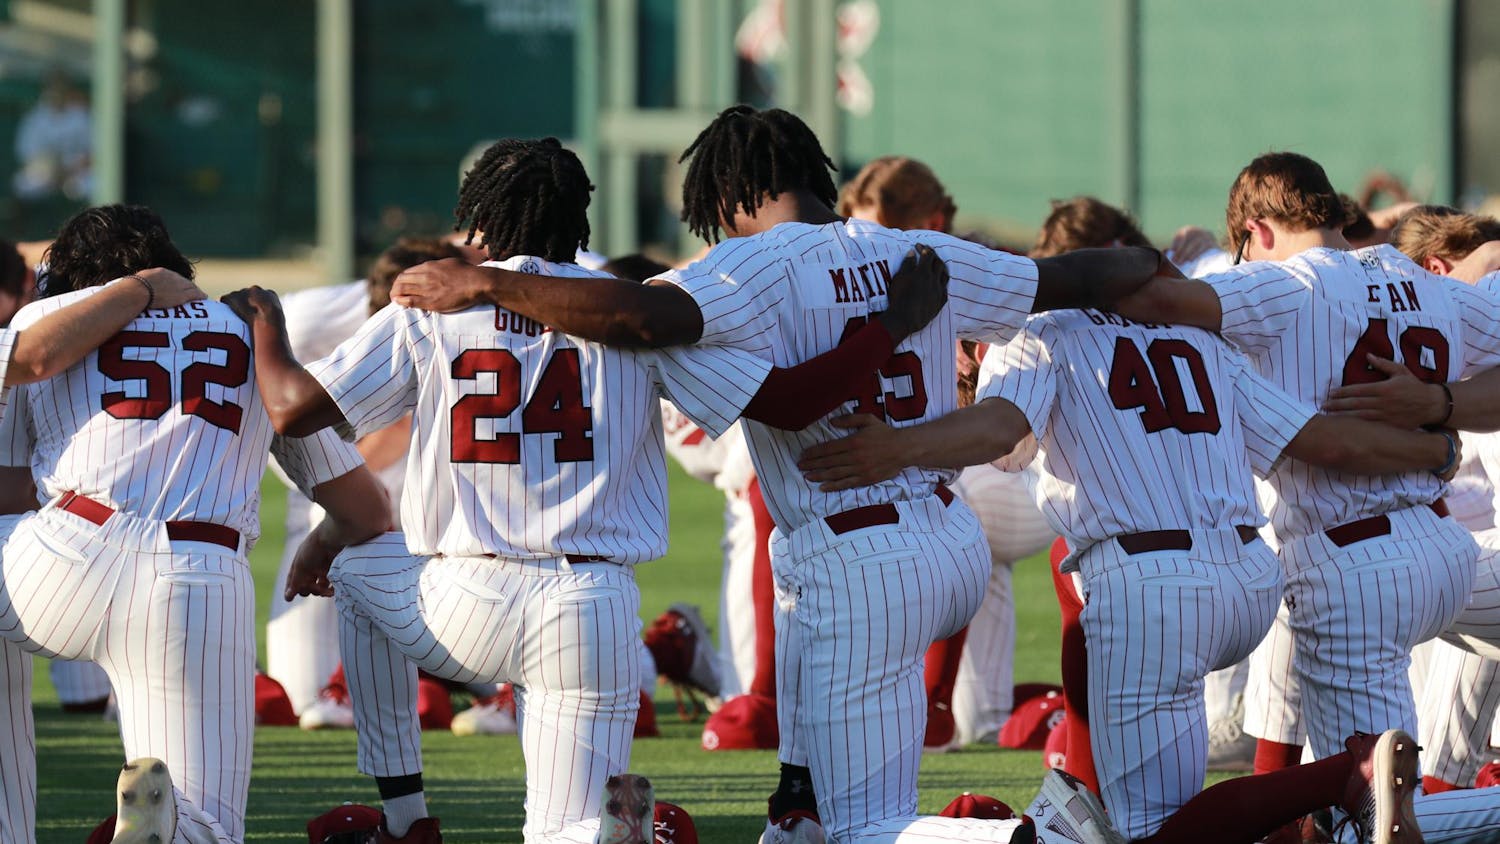 The No. 20 South Carolina baseball team lost its weekend series against No. 2 Arkansas 2-1, bringing its record to 27-13 on the season. While the Gamecocks were able to pull off a 6-3 win on Saturday afternoon, it fell to the Razorbacks on Friday and Saturday night. Next up, South Carolina will face No. 3 Kentucky on Friday, April 26, 2024, at 7 p.m. This will be the first of a three-game series.